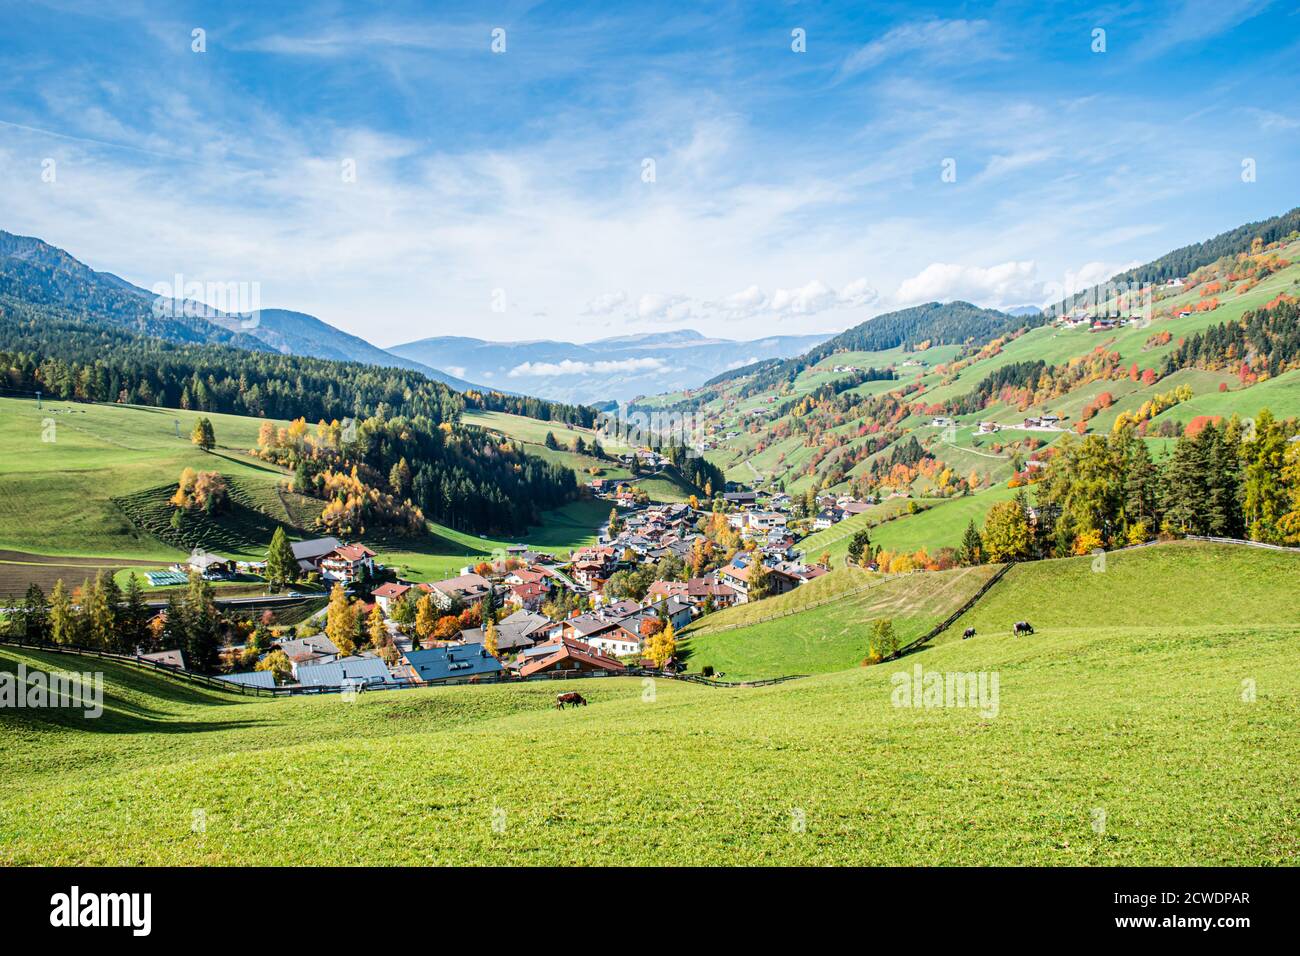 Landscape of early autumn in the village of Santa Magdalena in northern Italy on the slopes of the Dolomites in the valley of Val di Funes. Stock Photo